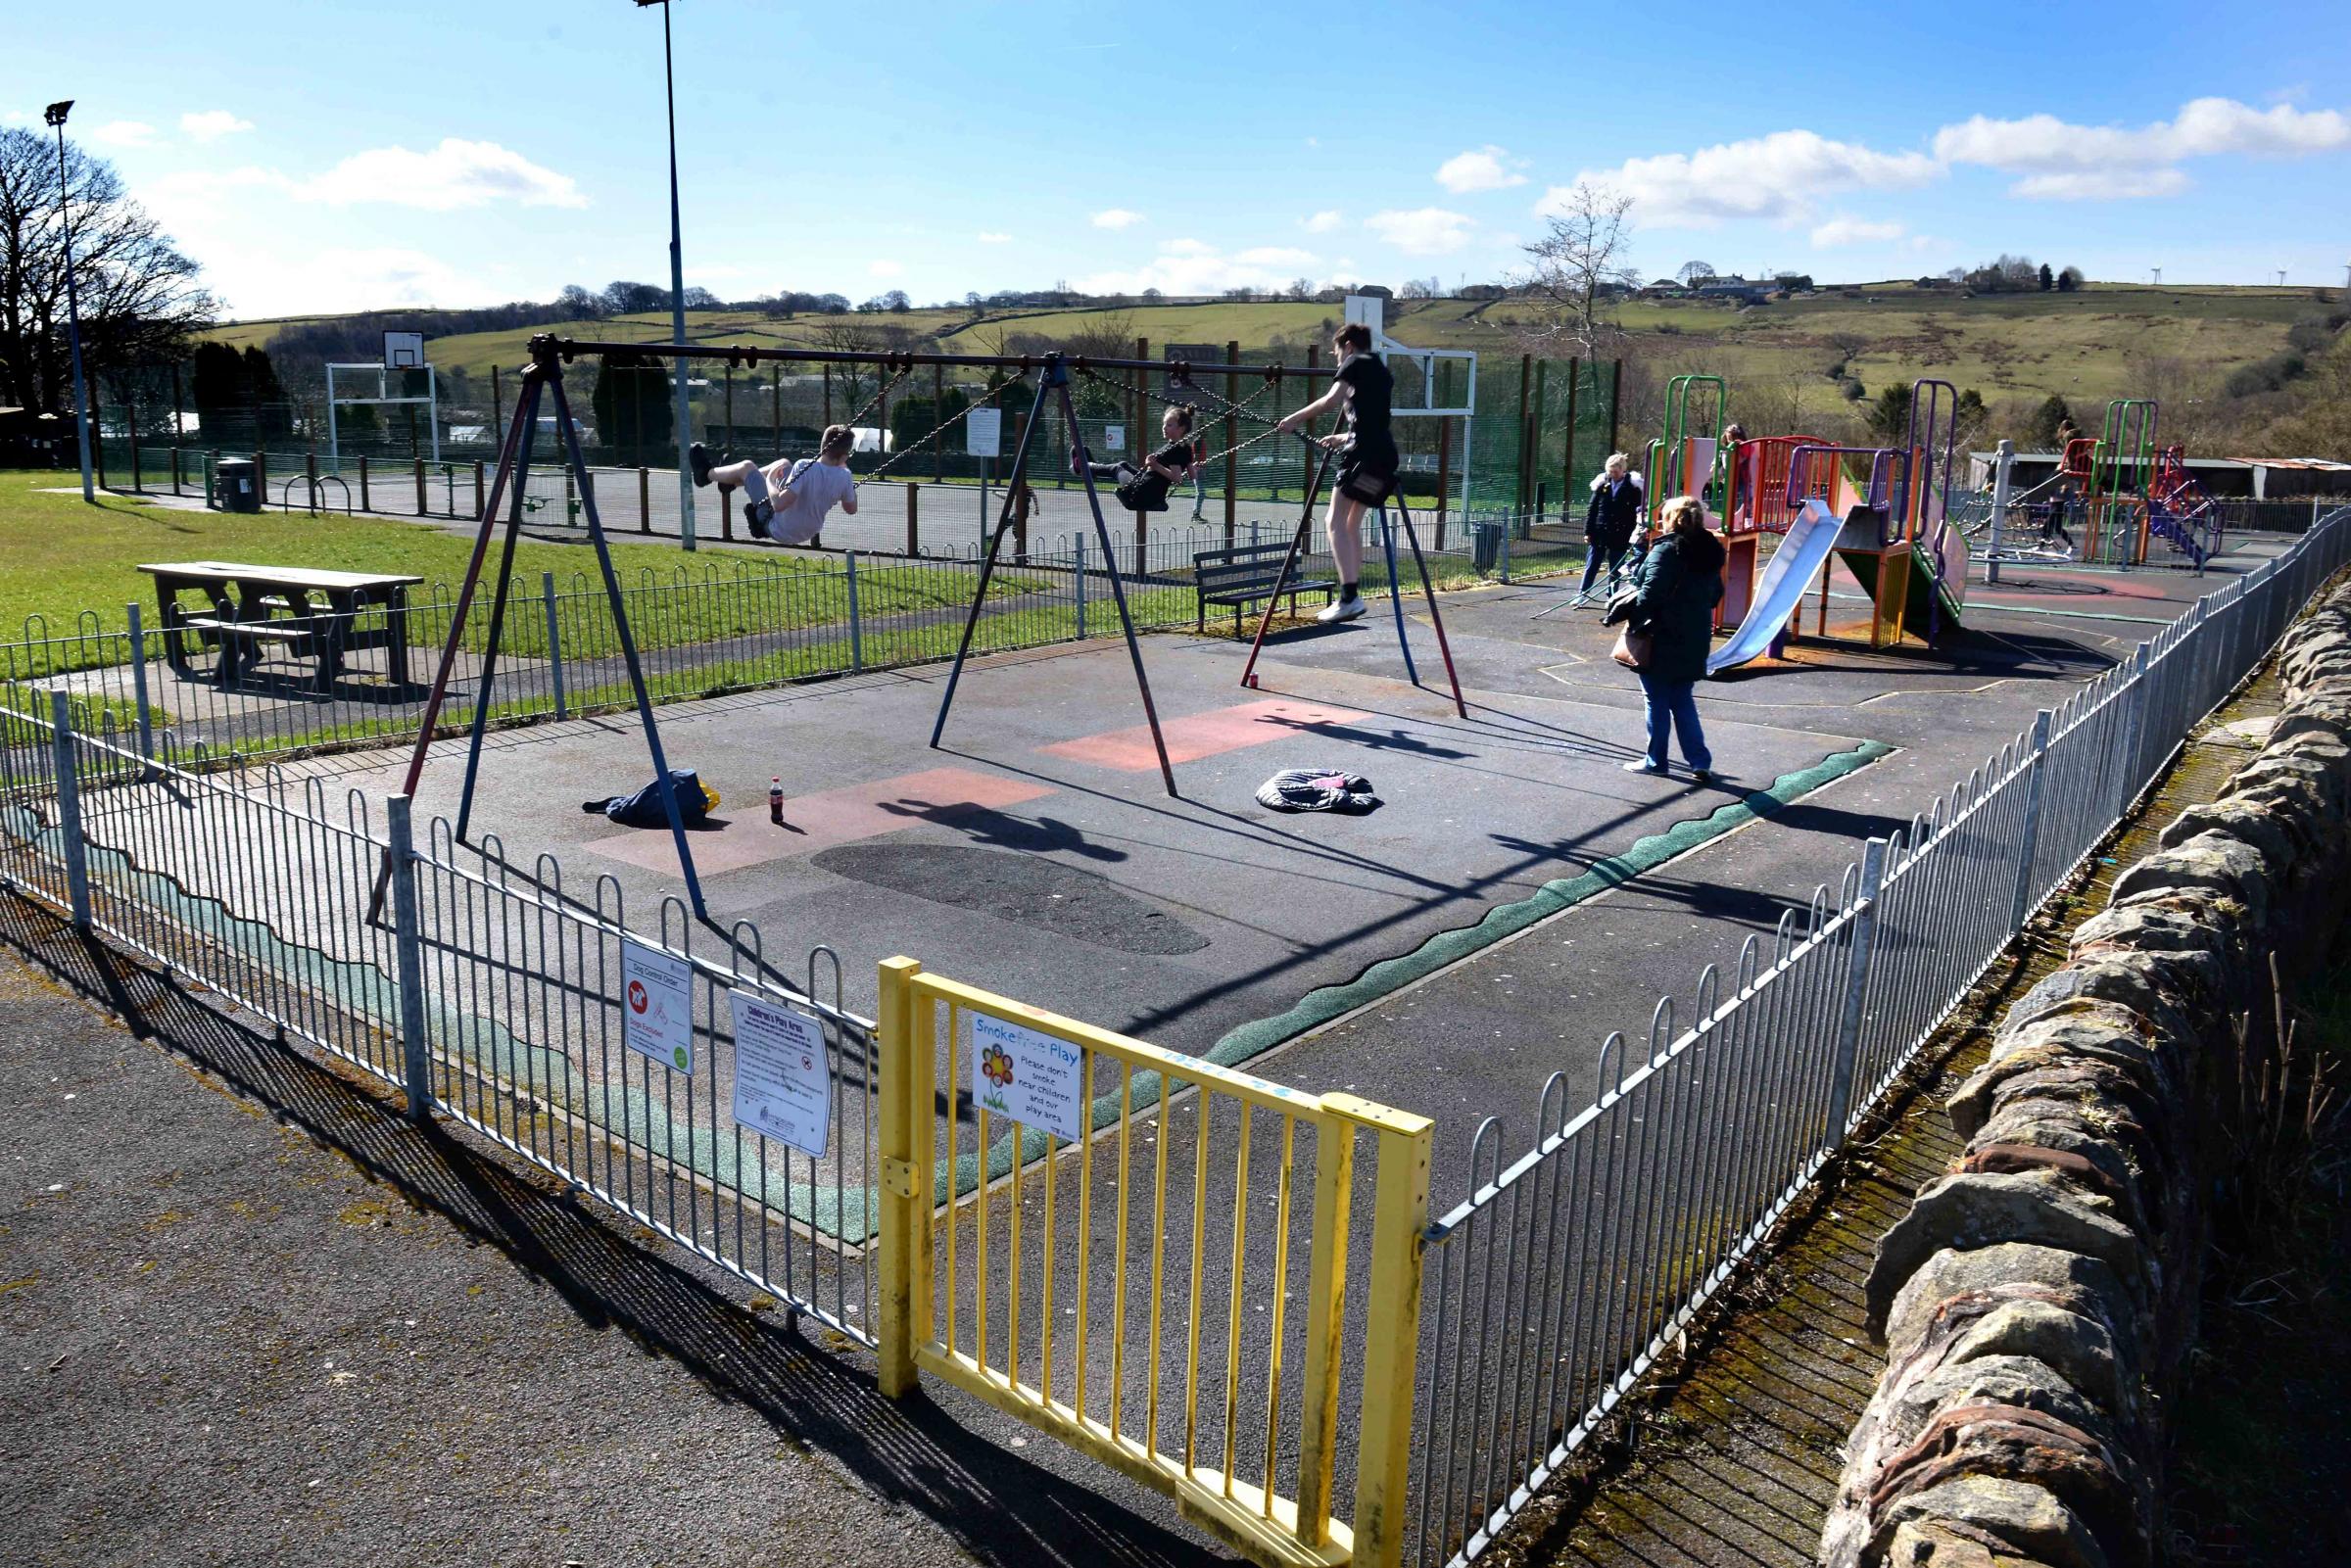 Work on new £30,000 play area will take five weeks to complete